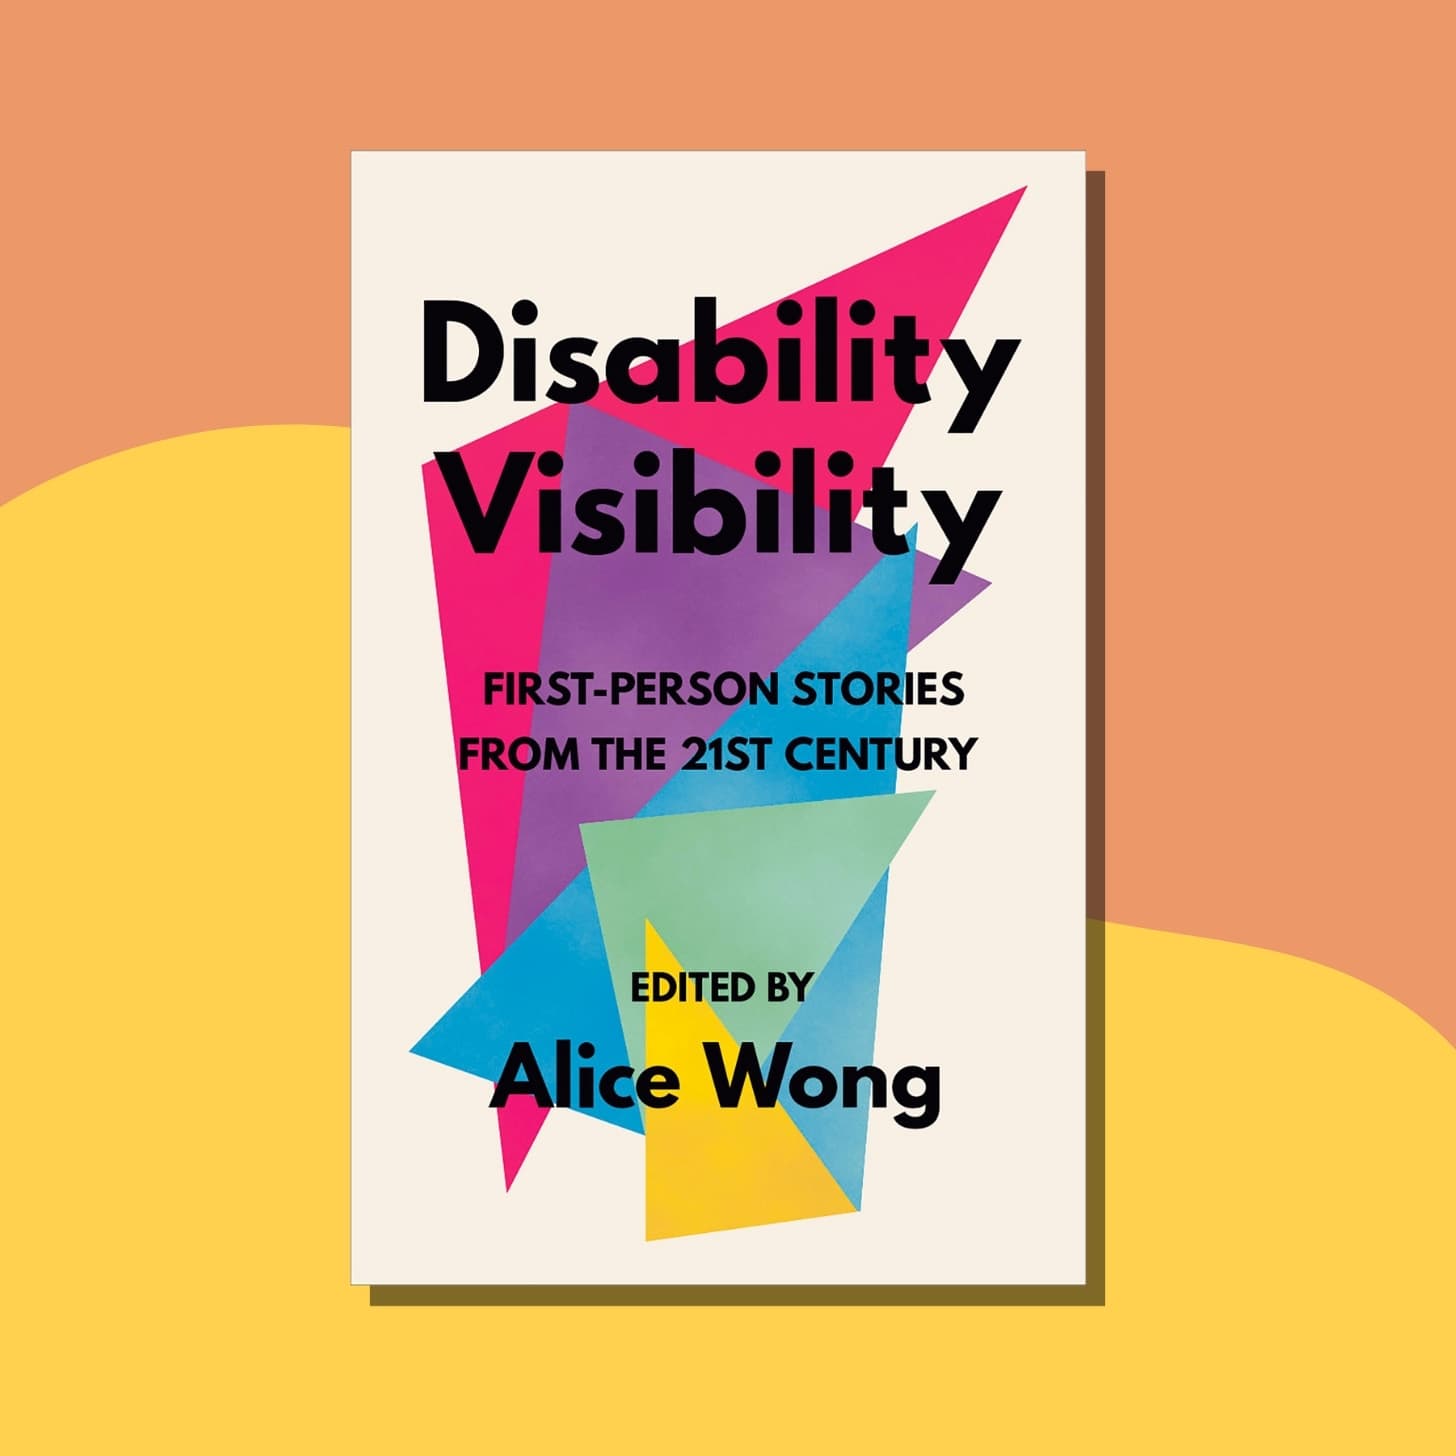 2. “Disability Visibility: First-Person Stories from the Twenty-First Century” edited by Alice Wong